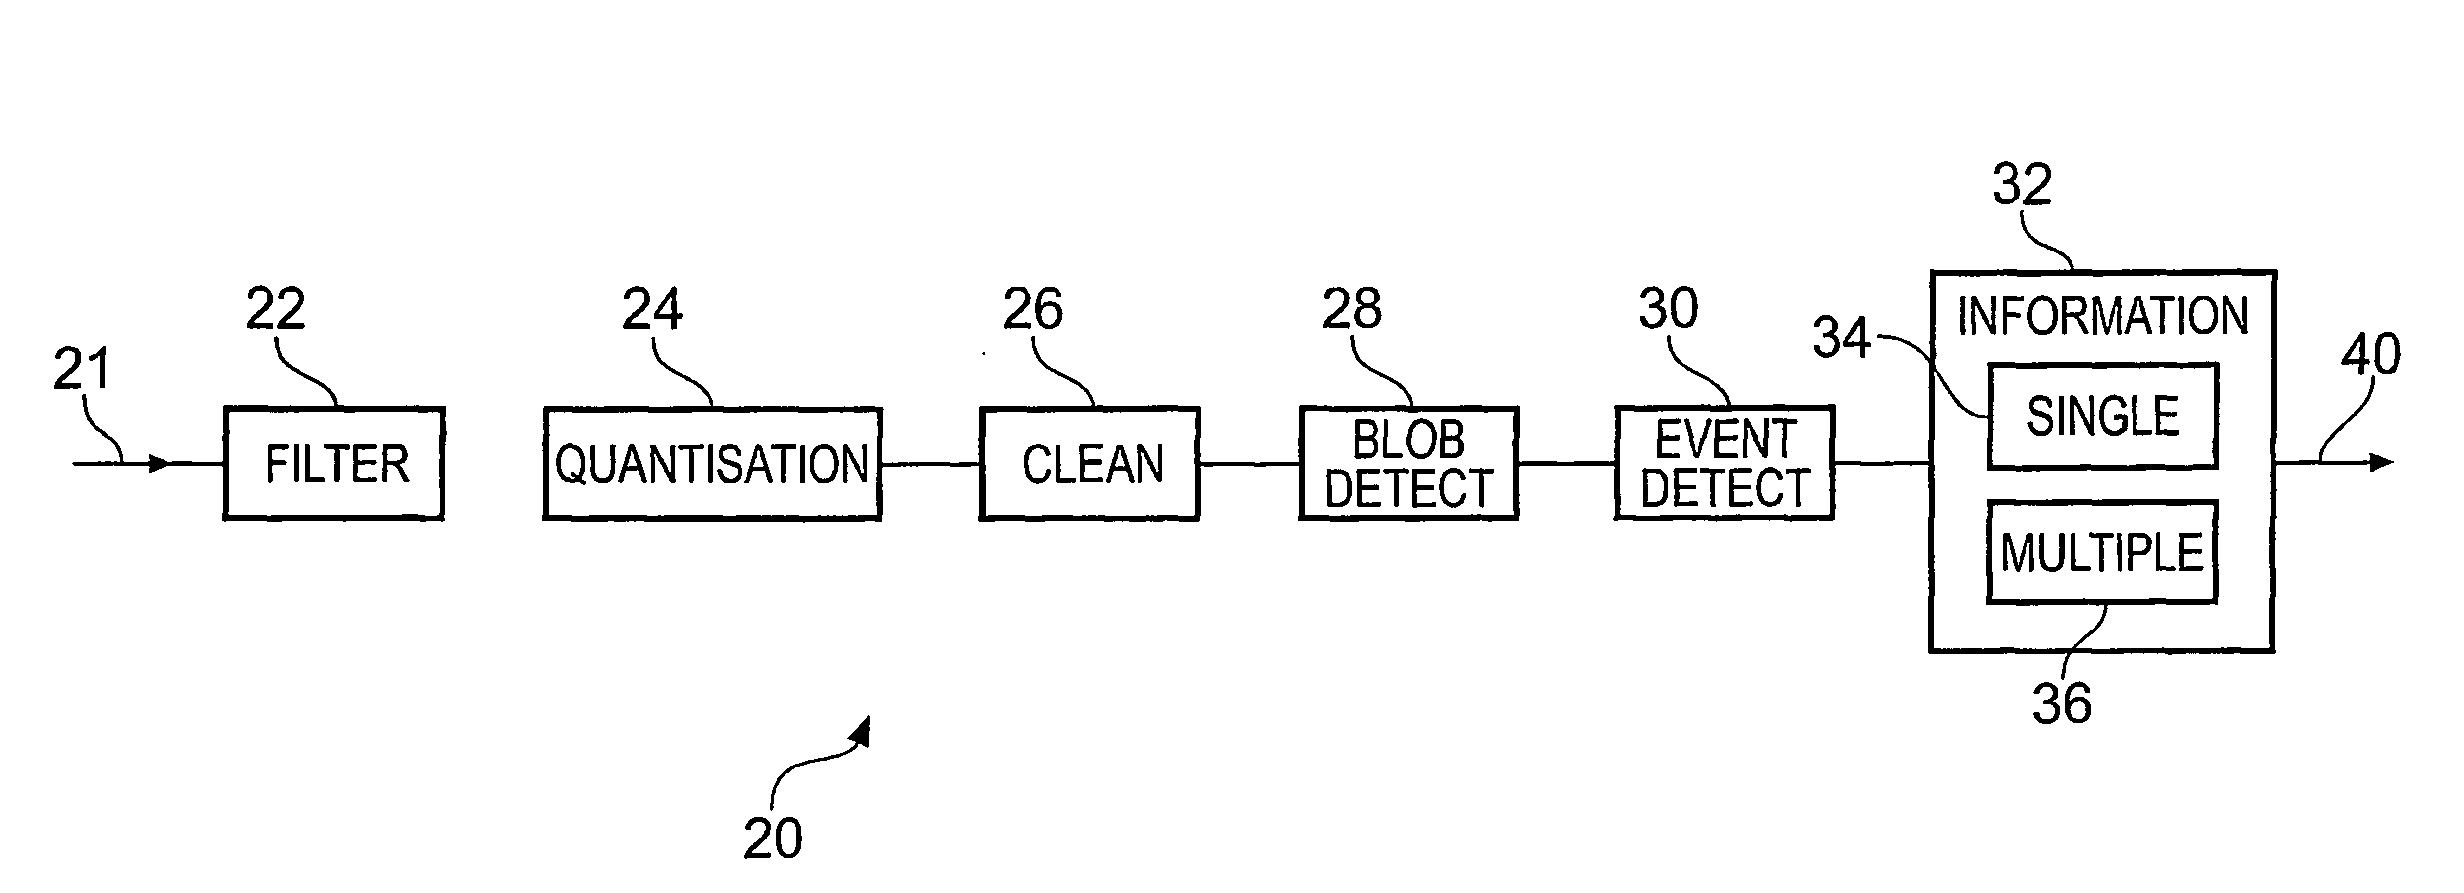 Method for Automatically Characterizing the Behavior of One or More Objects